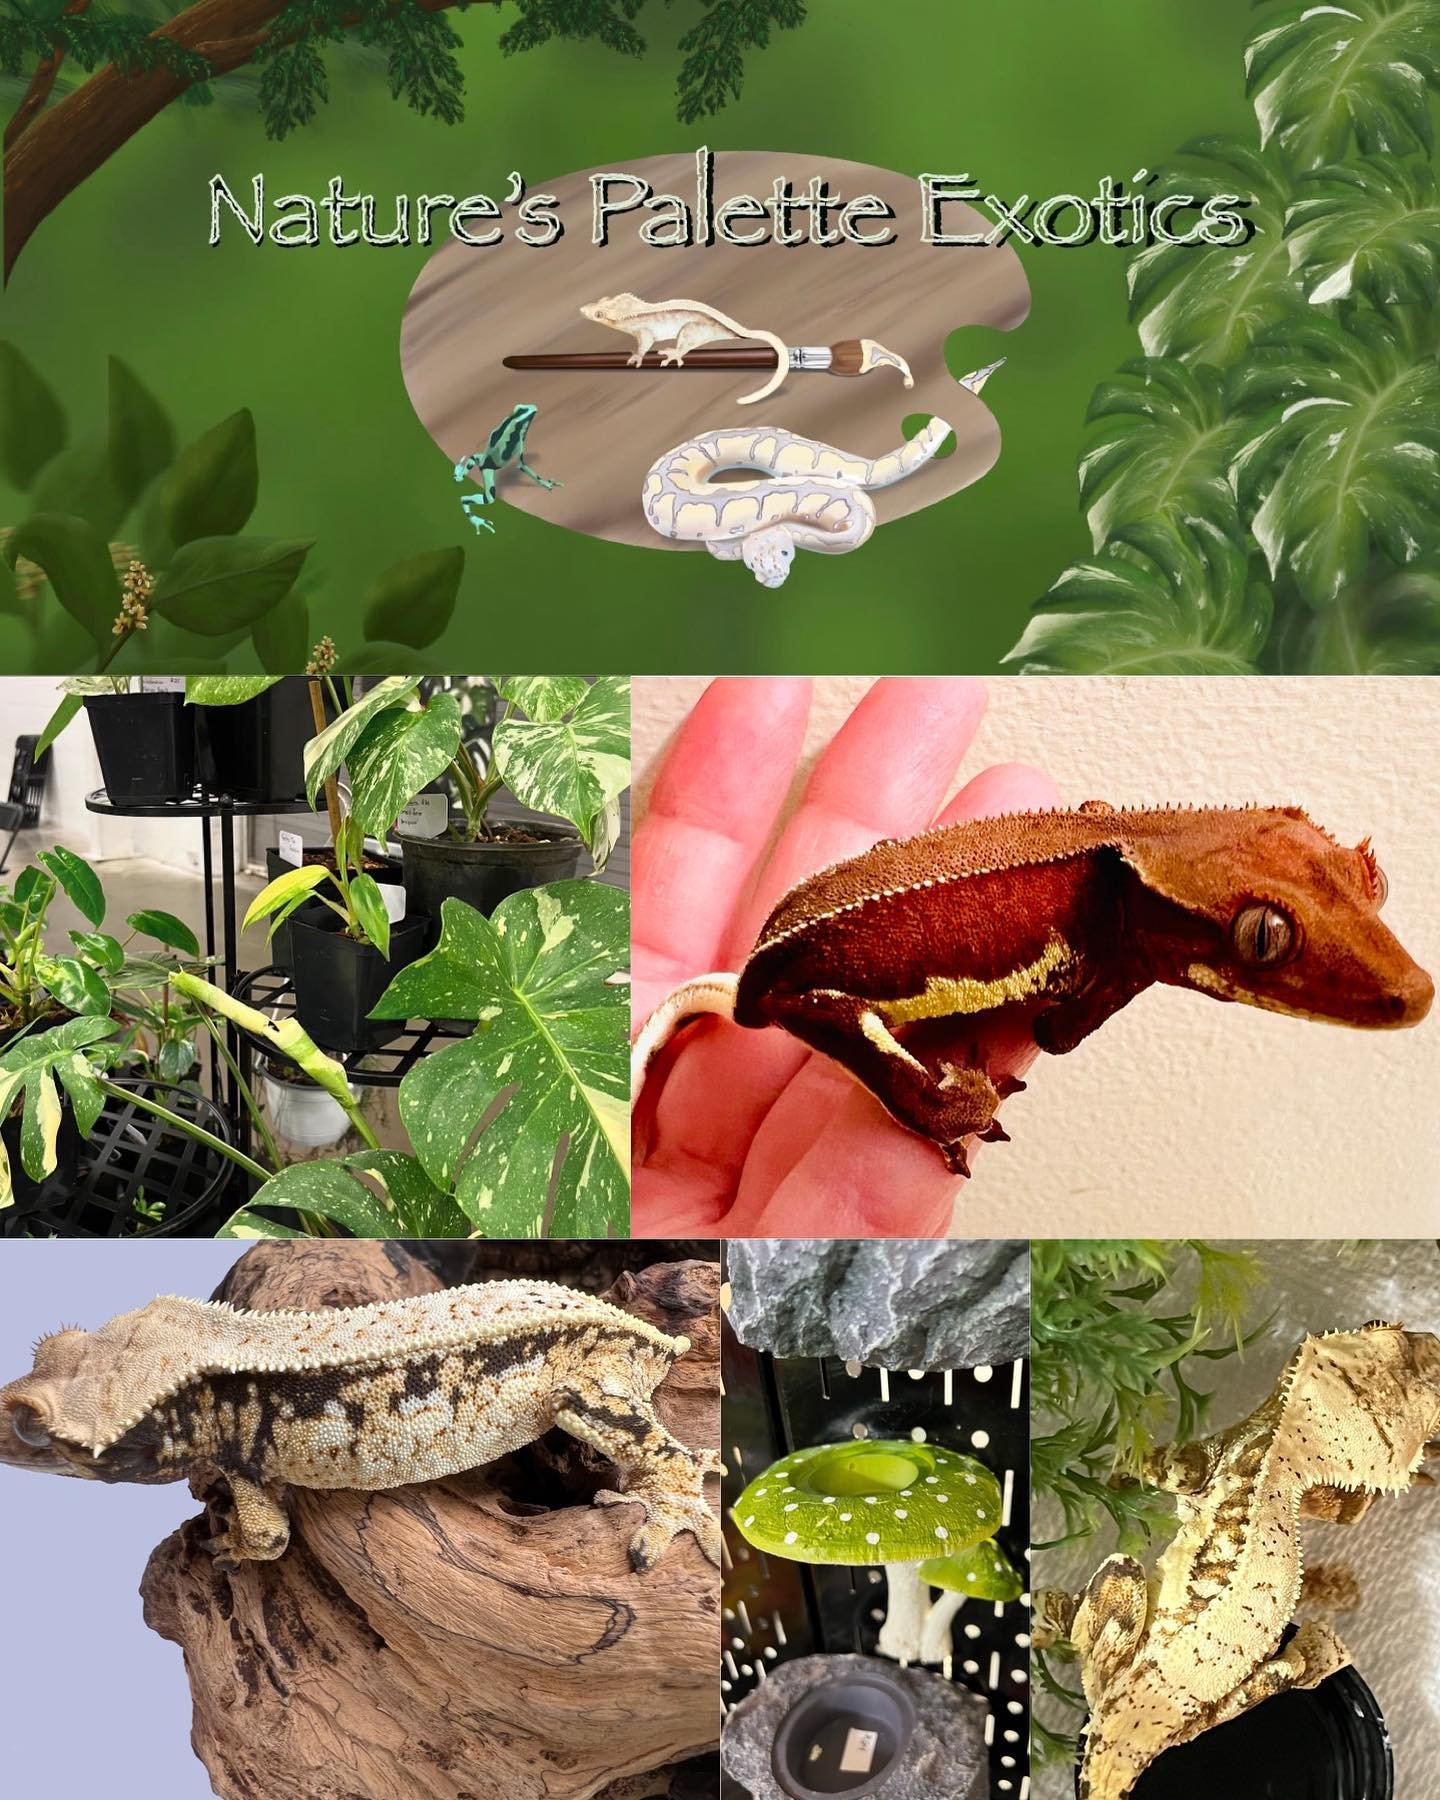 @naturespaletteexotics.ig will be joining us on June 2nd! 

They have a passion for breeding quality animals. They have gorgeous captive bred crested geckos and chahouas. They carry a wide range of supplies too. They also have a nice selection of tro